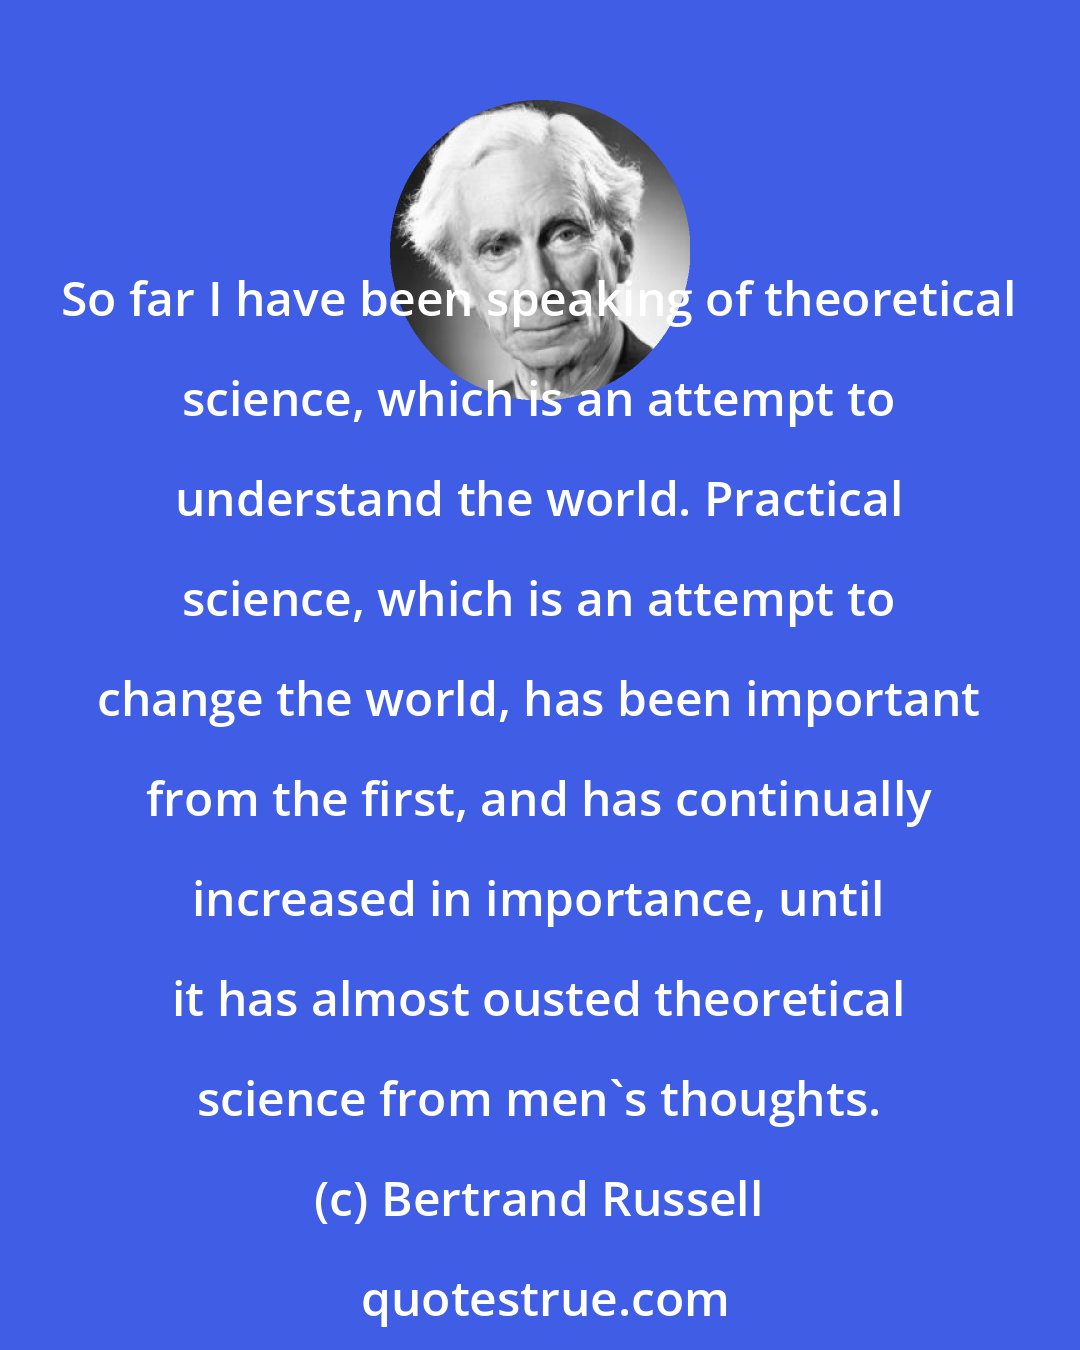 Bertrand Russell: So far I have been speaking of theoretical science, which is an attempt to understand the world. Practical science, which is an attempt to change the world, has been important from the first, and has continually increased in importance, until it has almost ousted theoretical science from men's thoughts.